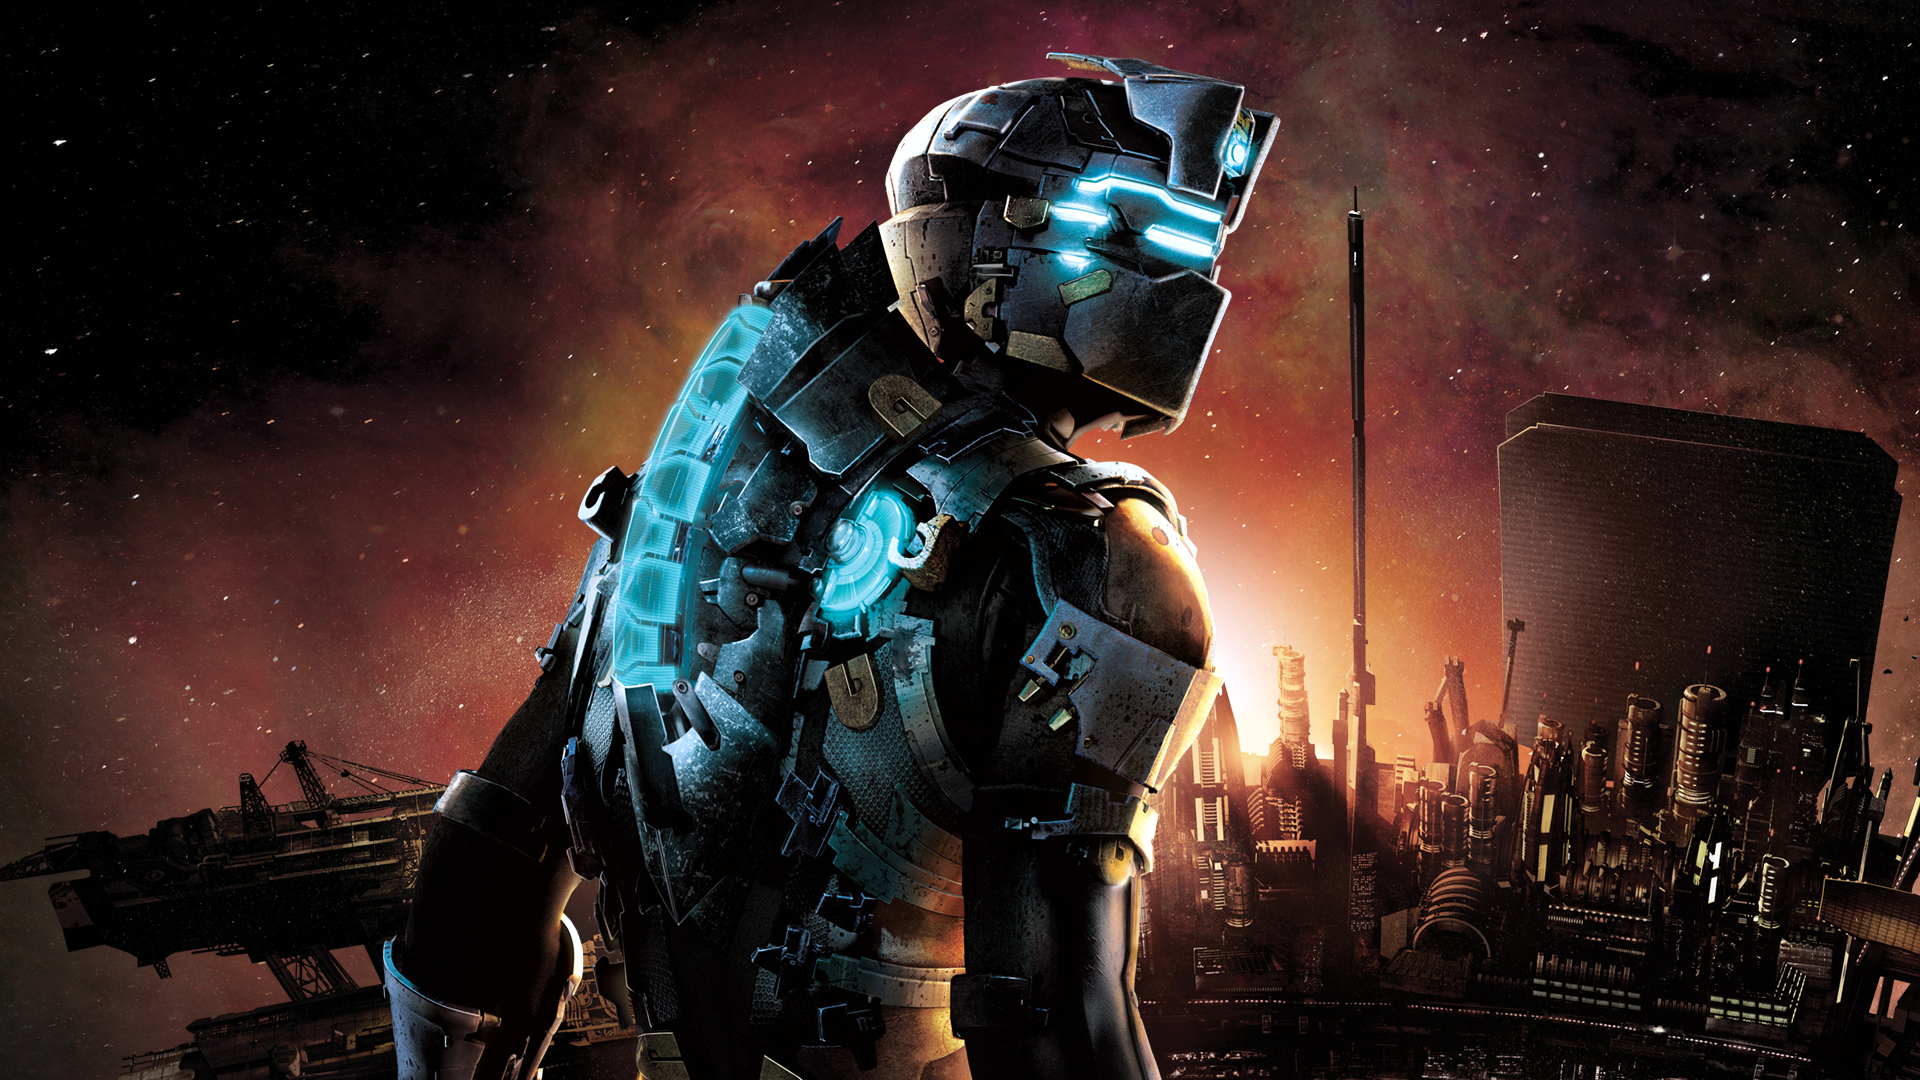 One of Dead Space 2’s key developers is working on the remake